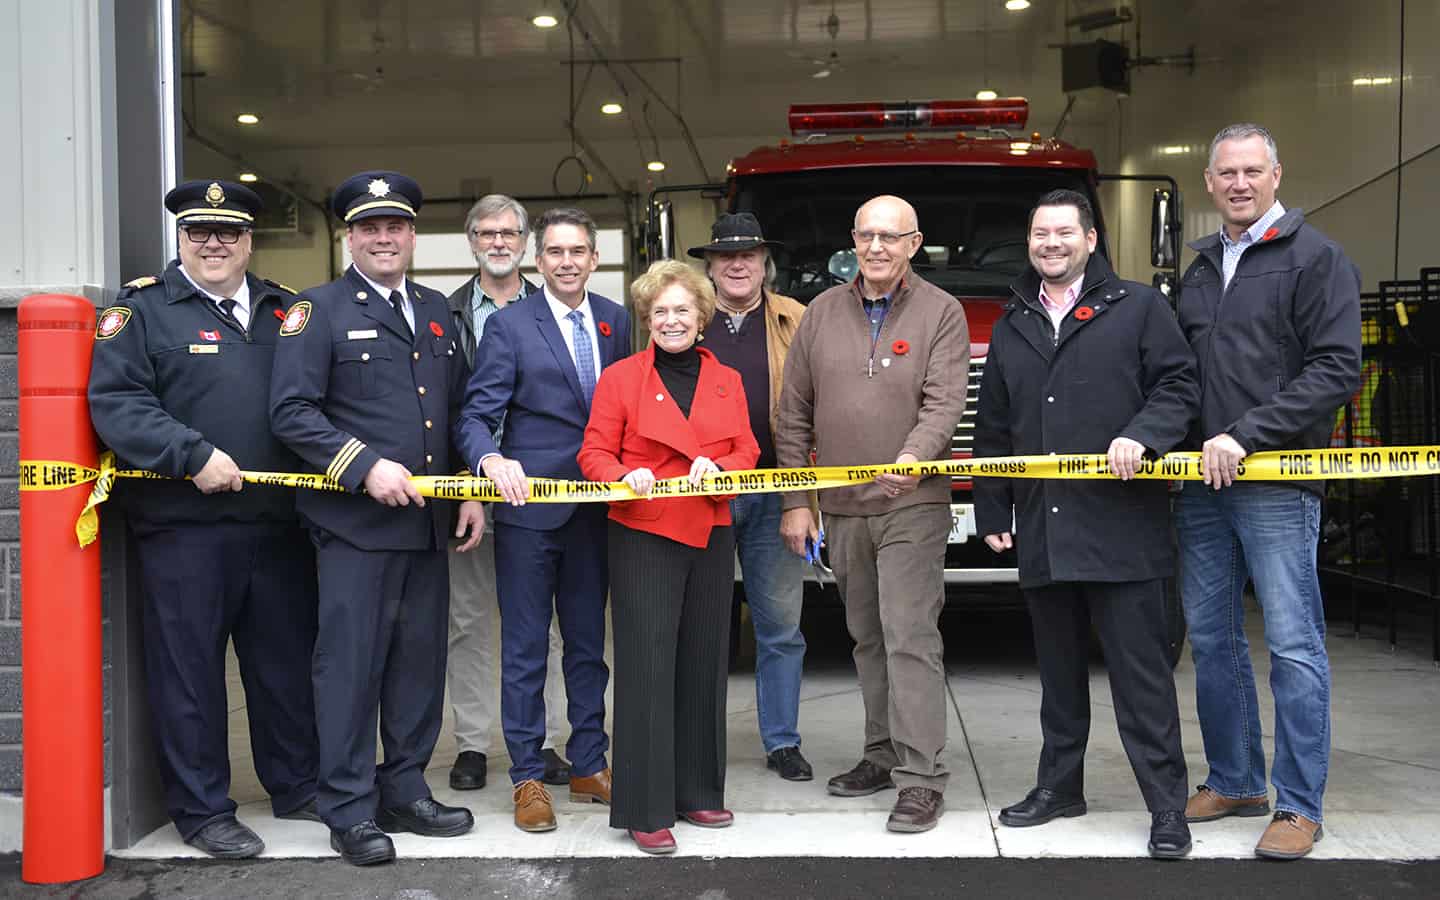 New St. Clements fire station officially open for service